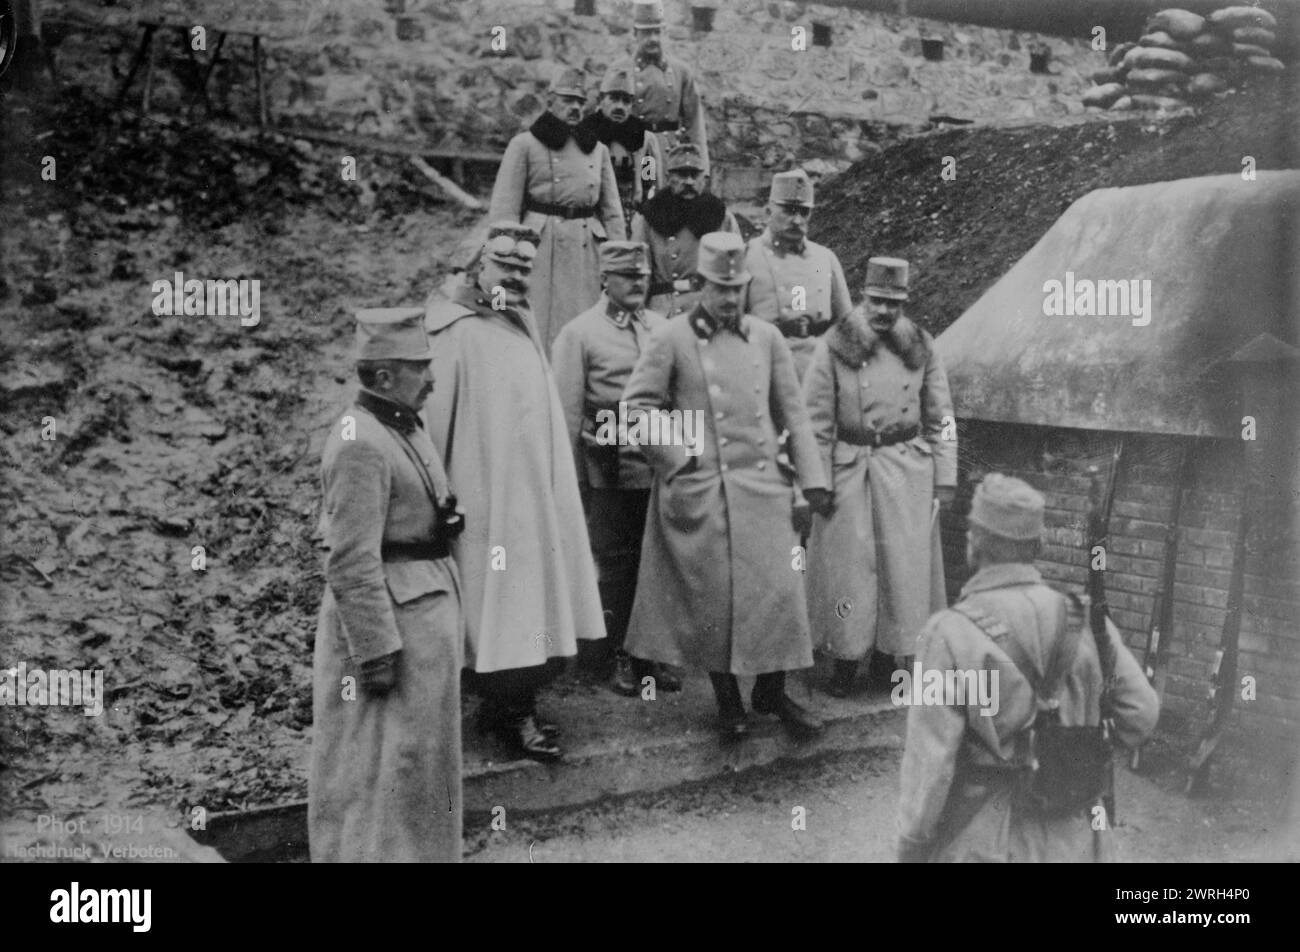 Karl Franz Josef in Przemysl Fort, 1914 (date created or published later). Karl Franz Joseph (Charles I of Austria) (1887-1922) visiting Przemysl Fortress, Przemysl, Austro-Hungarian Empire (now in Poland) during World War I. Stock Photo